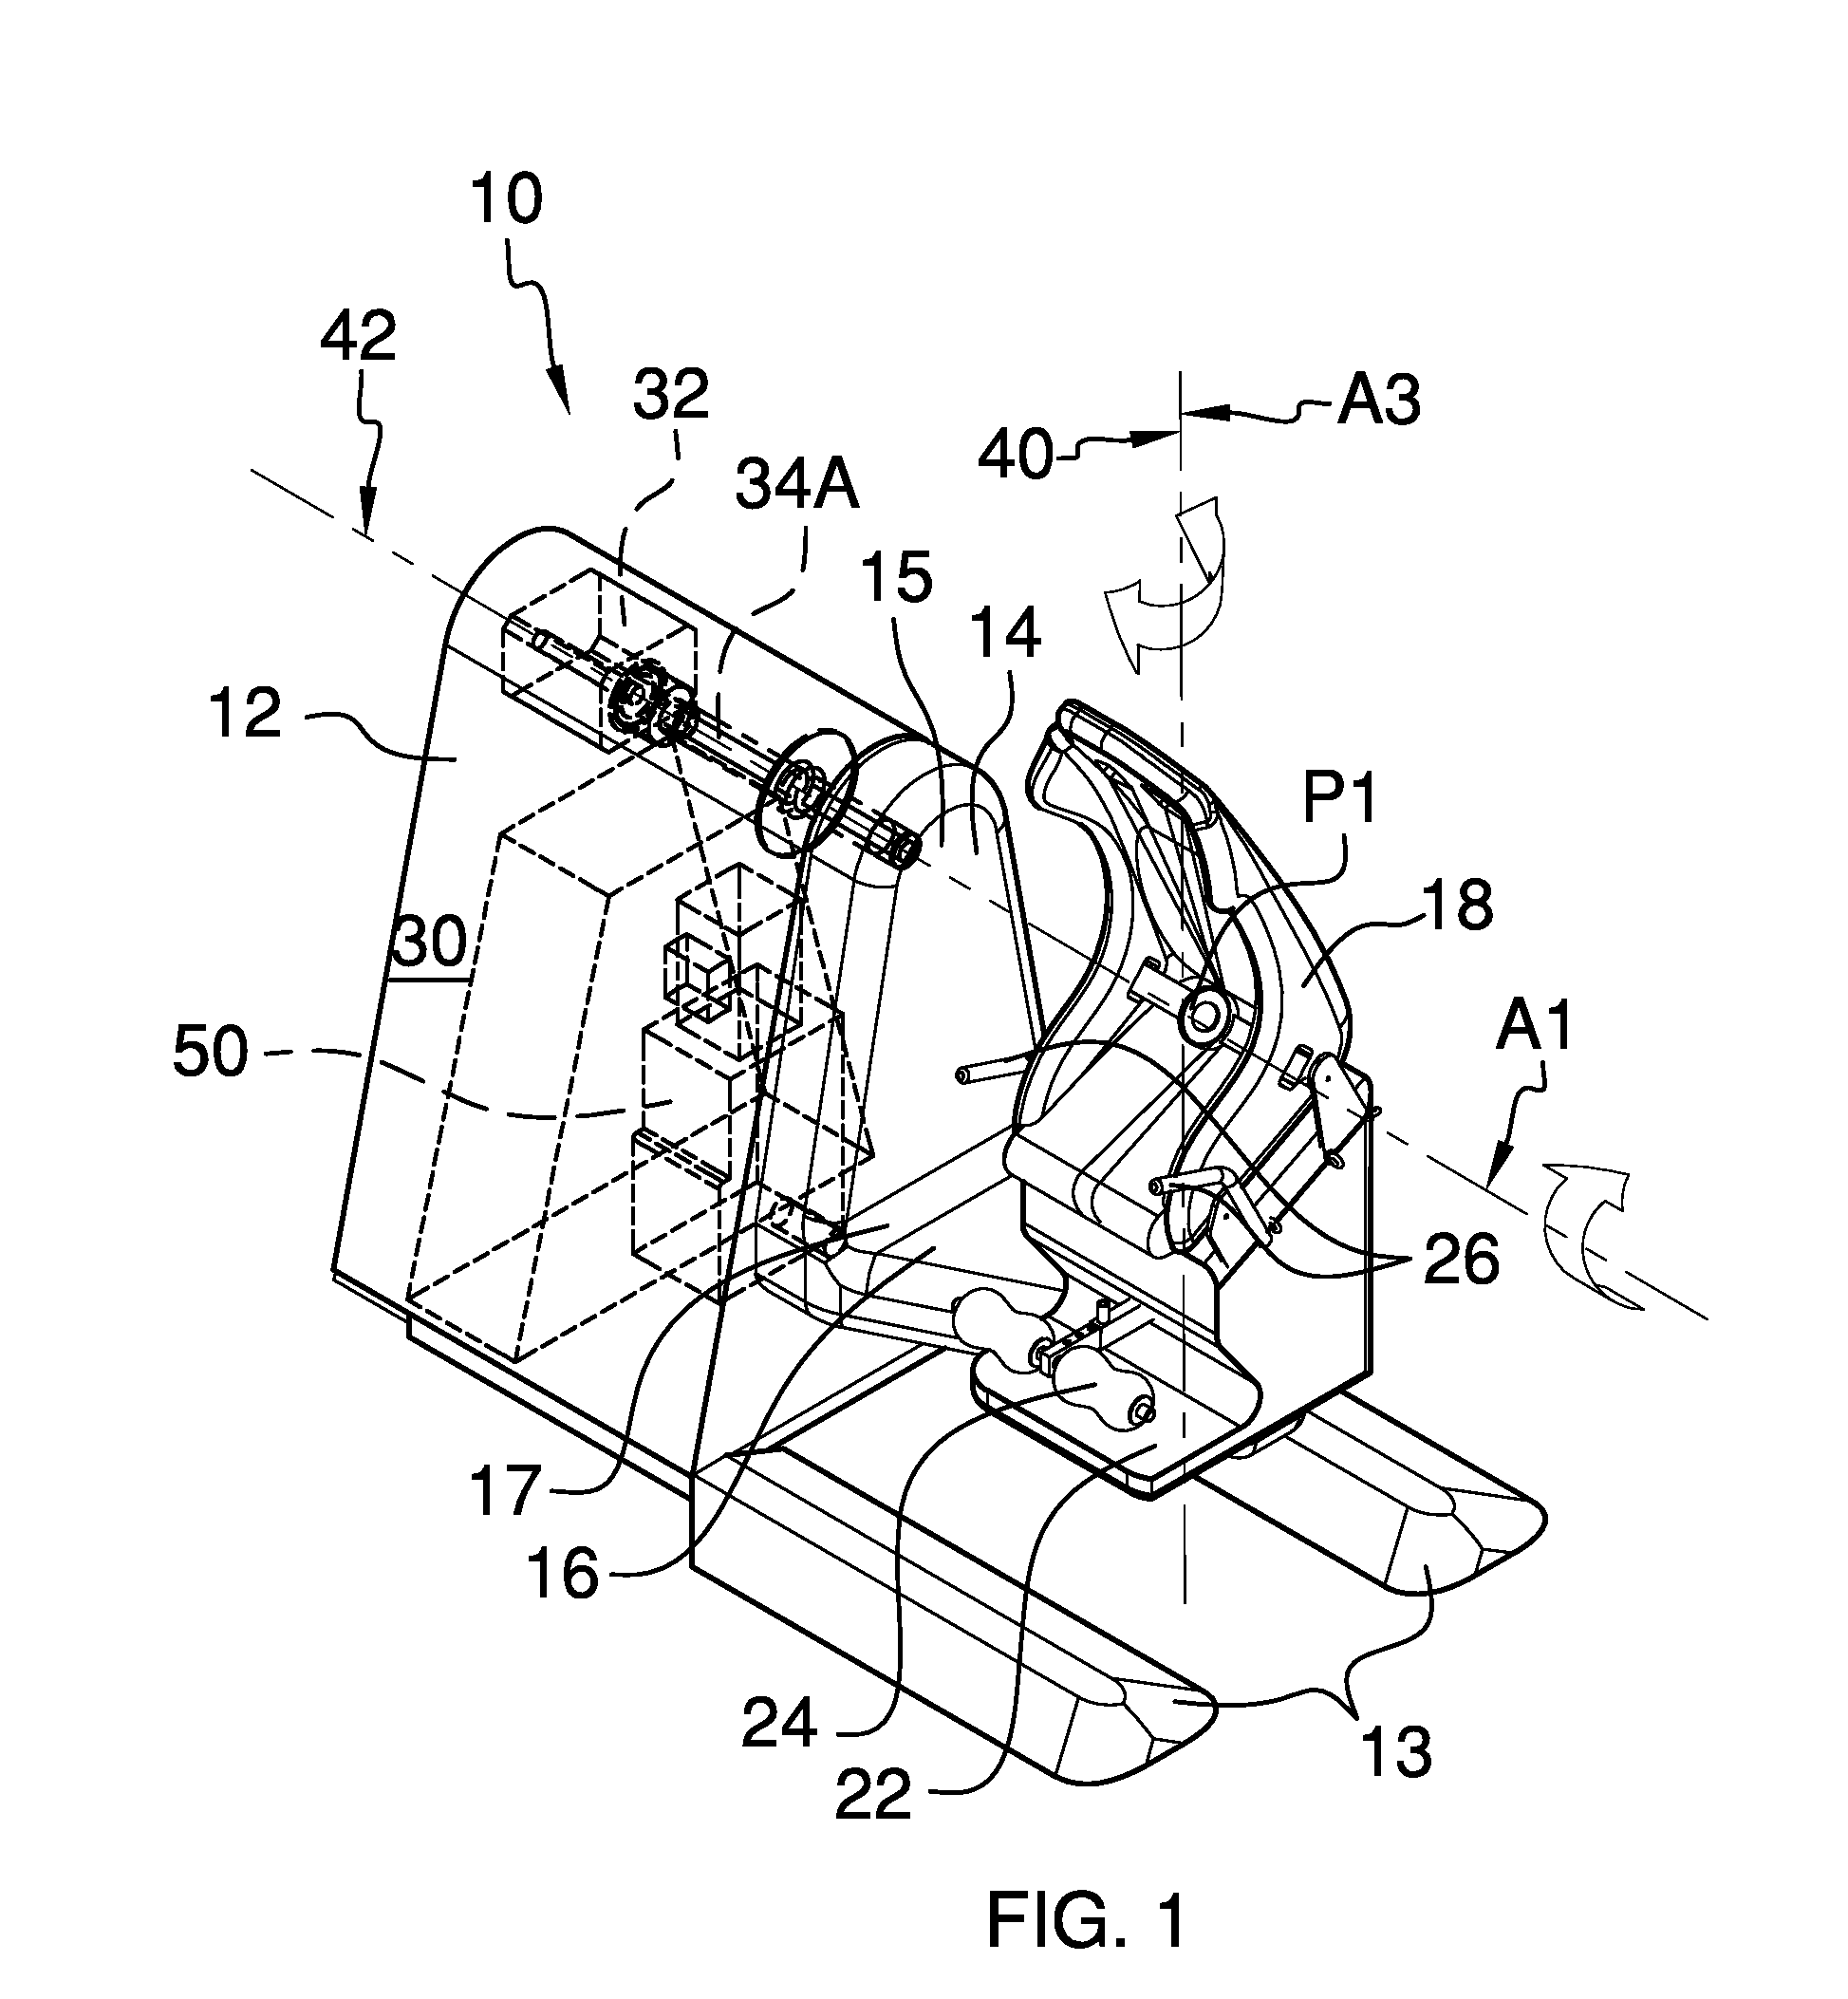 Patient positioning apparatus for examination and treatment and method of the same